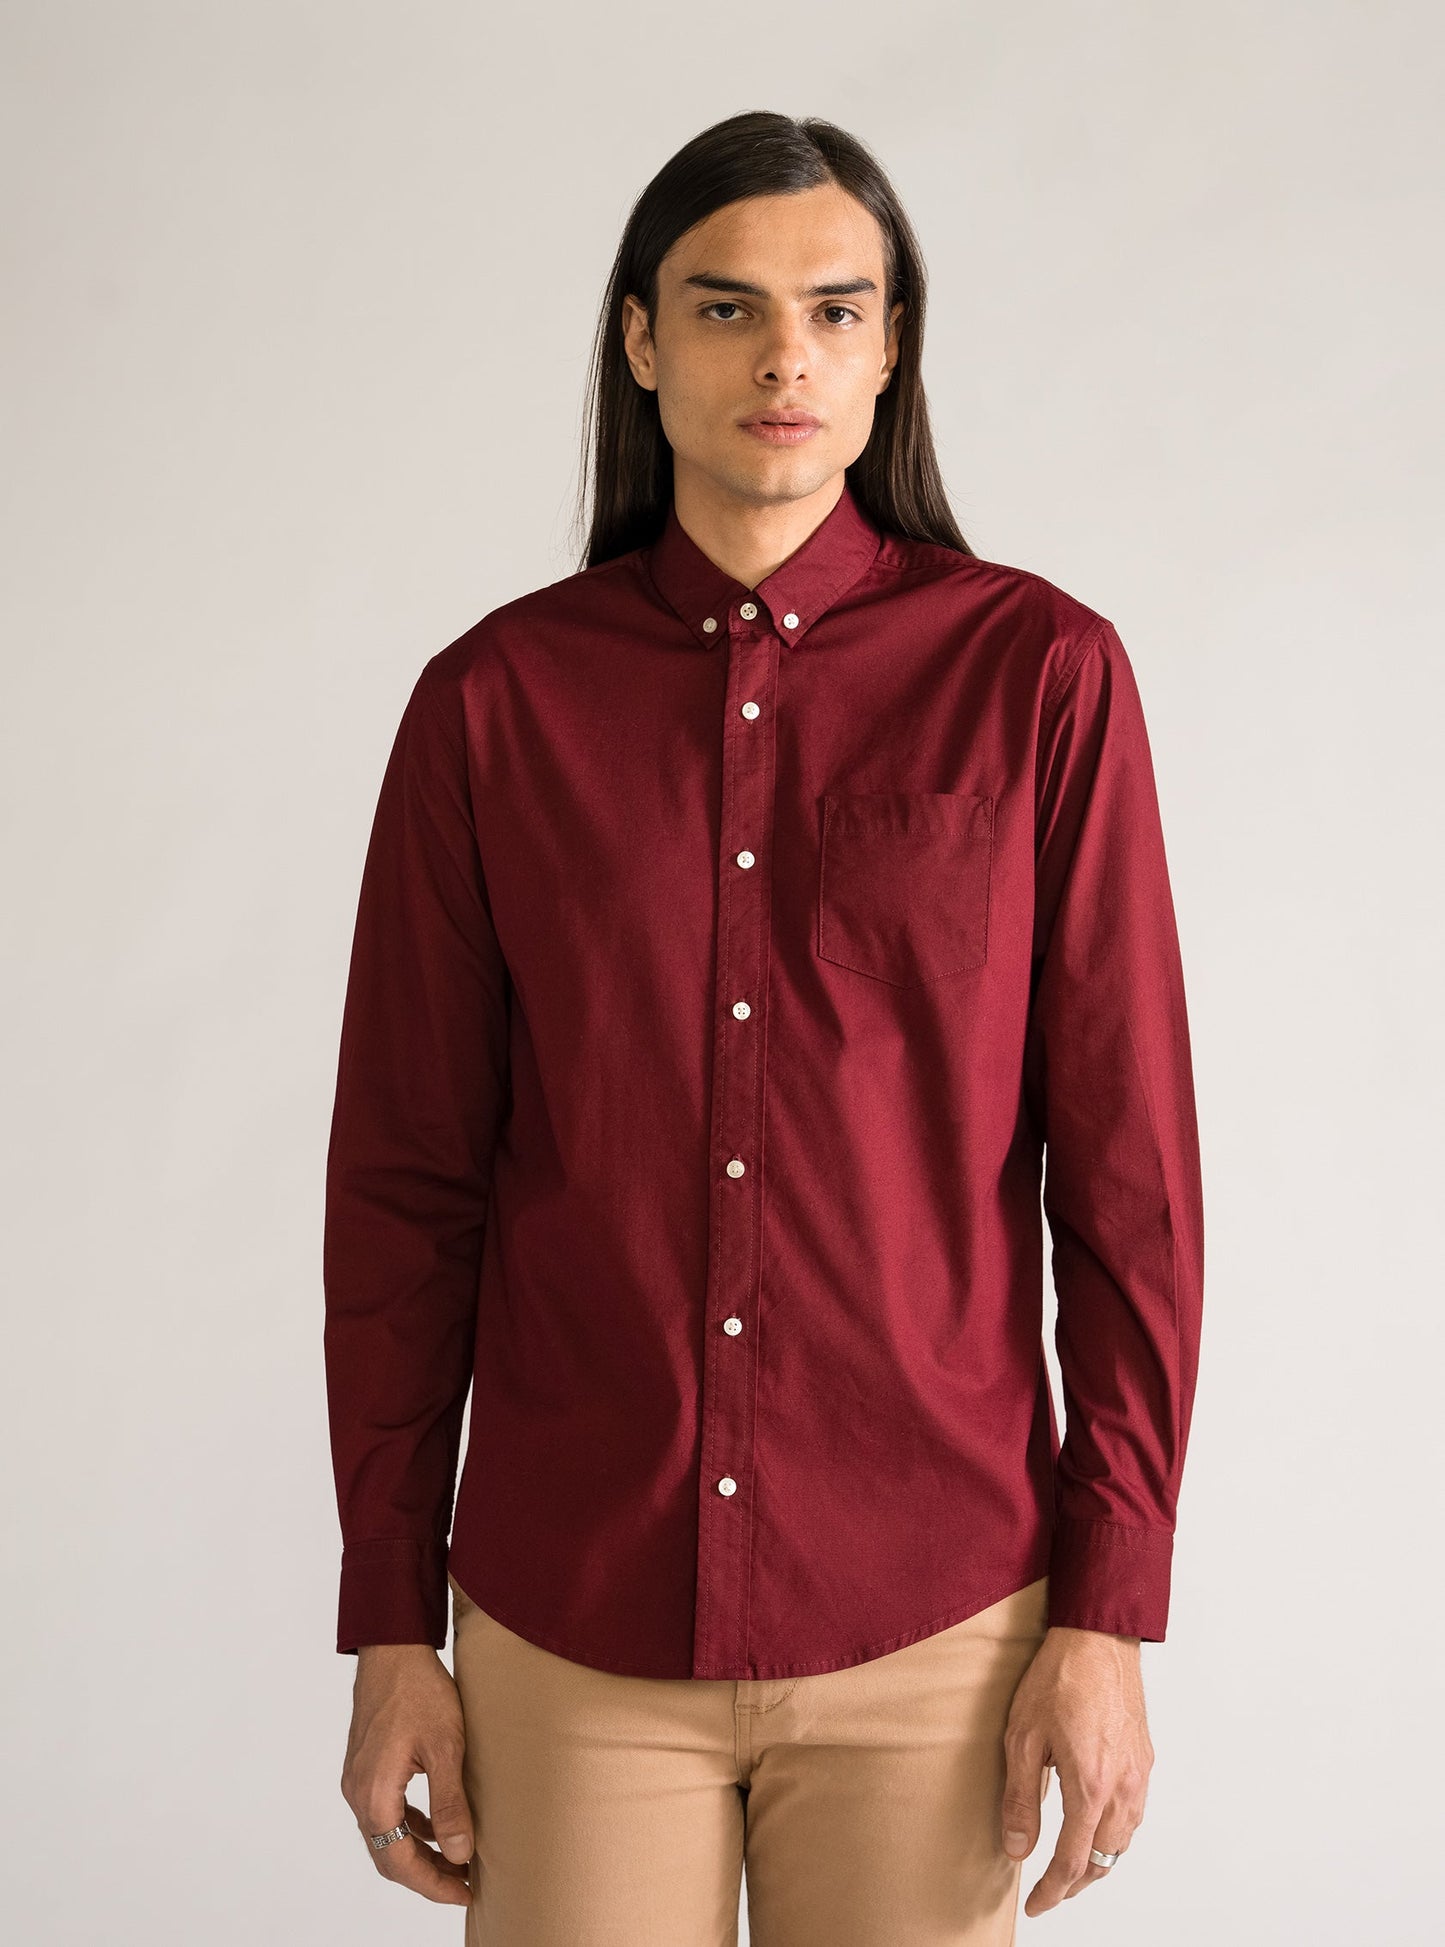 The Finest One Shirt, Corinto